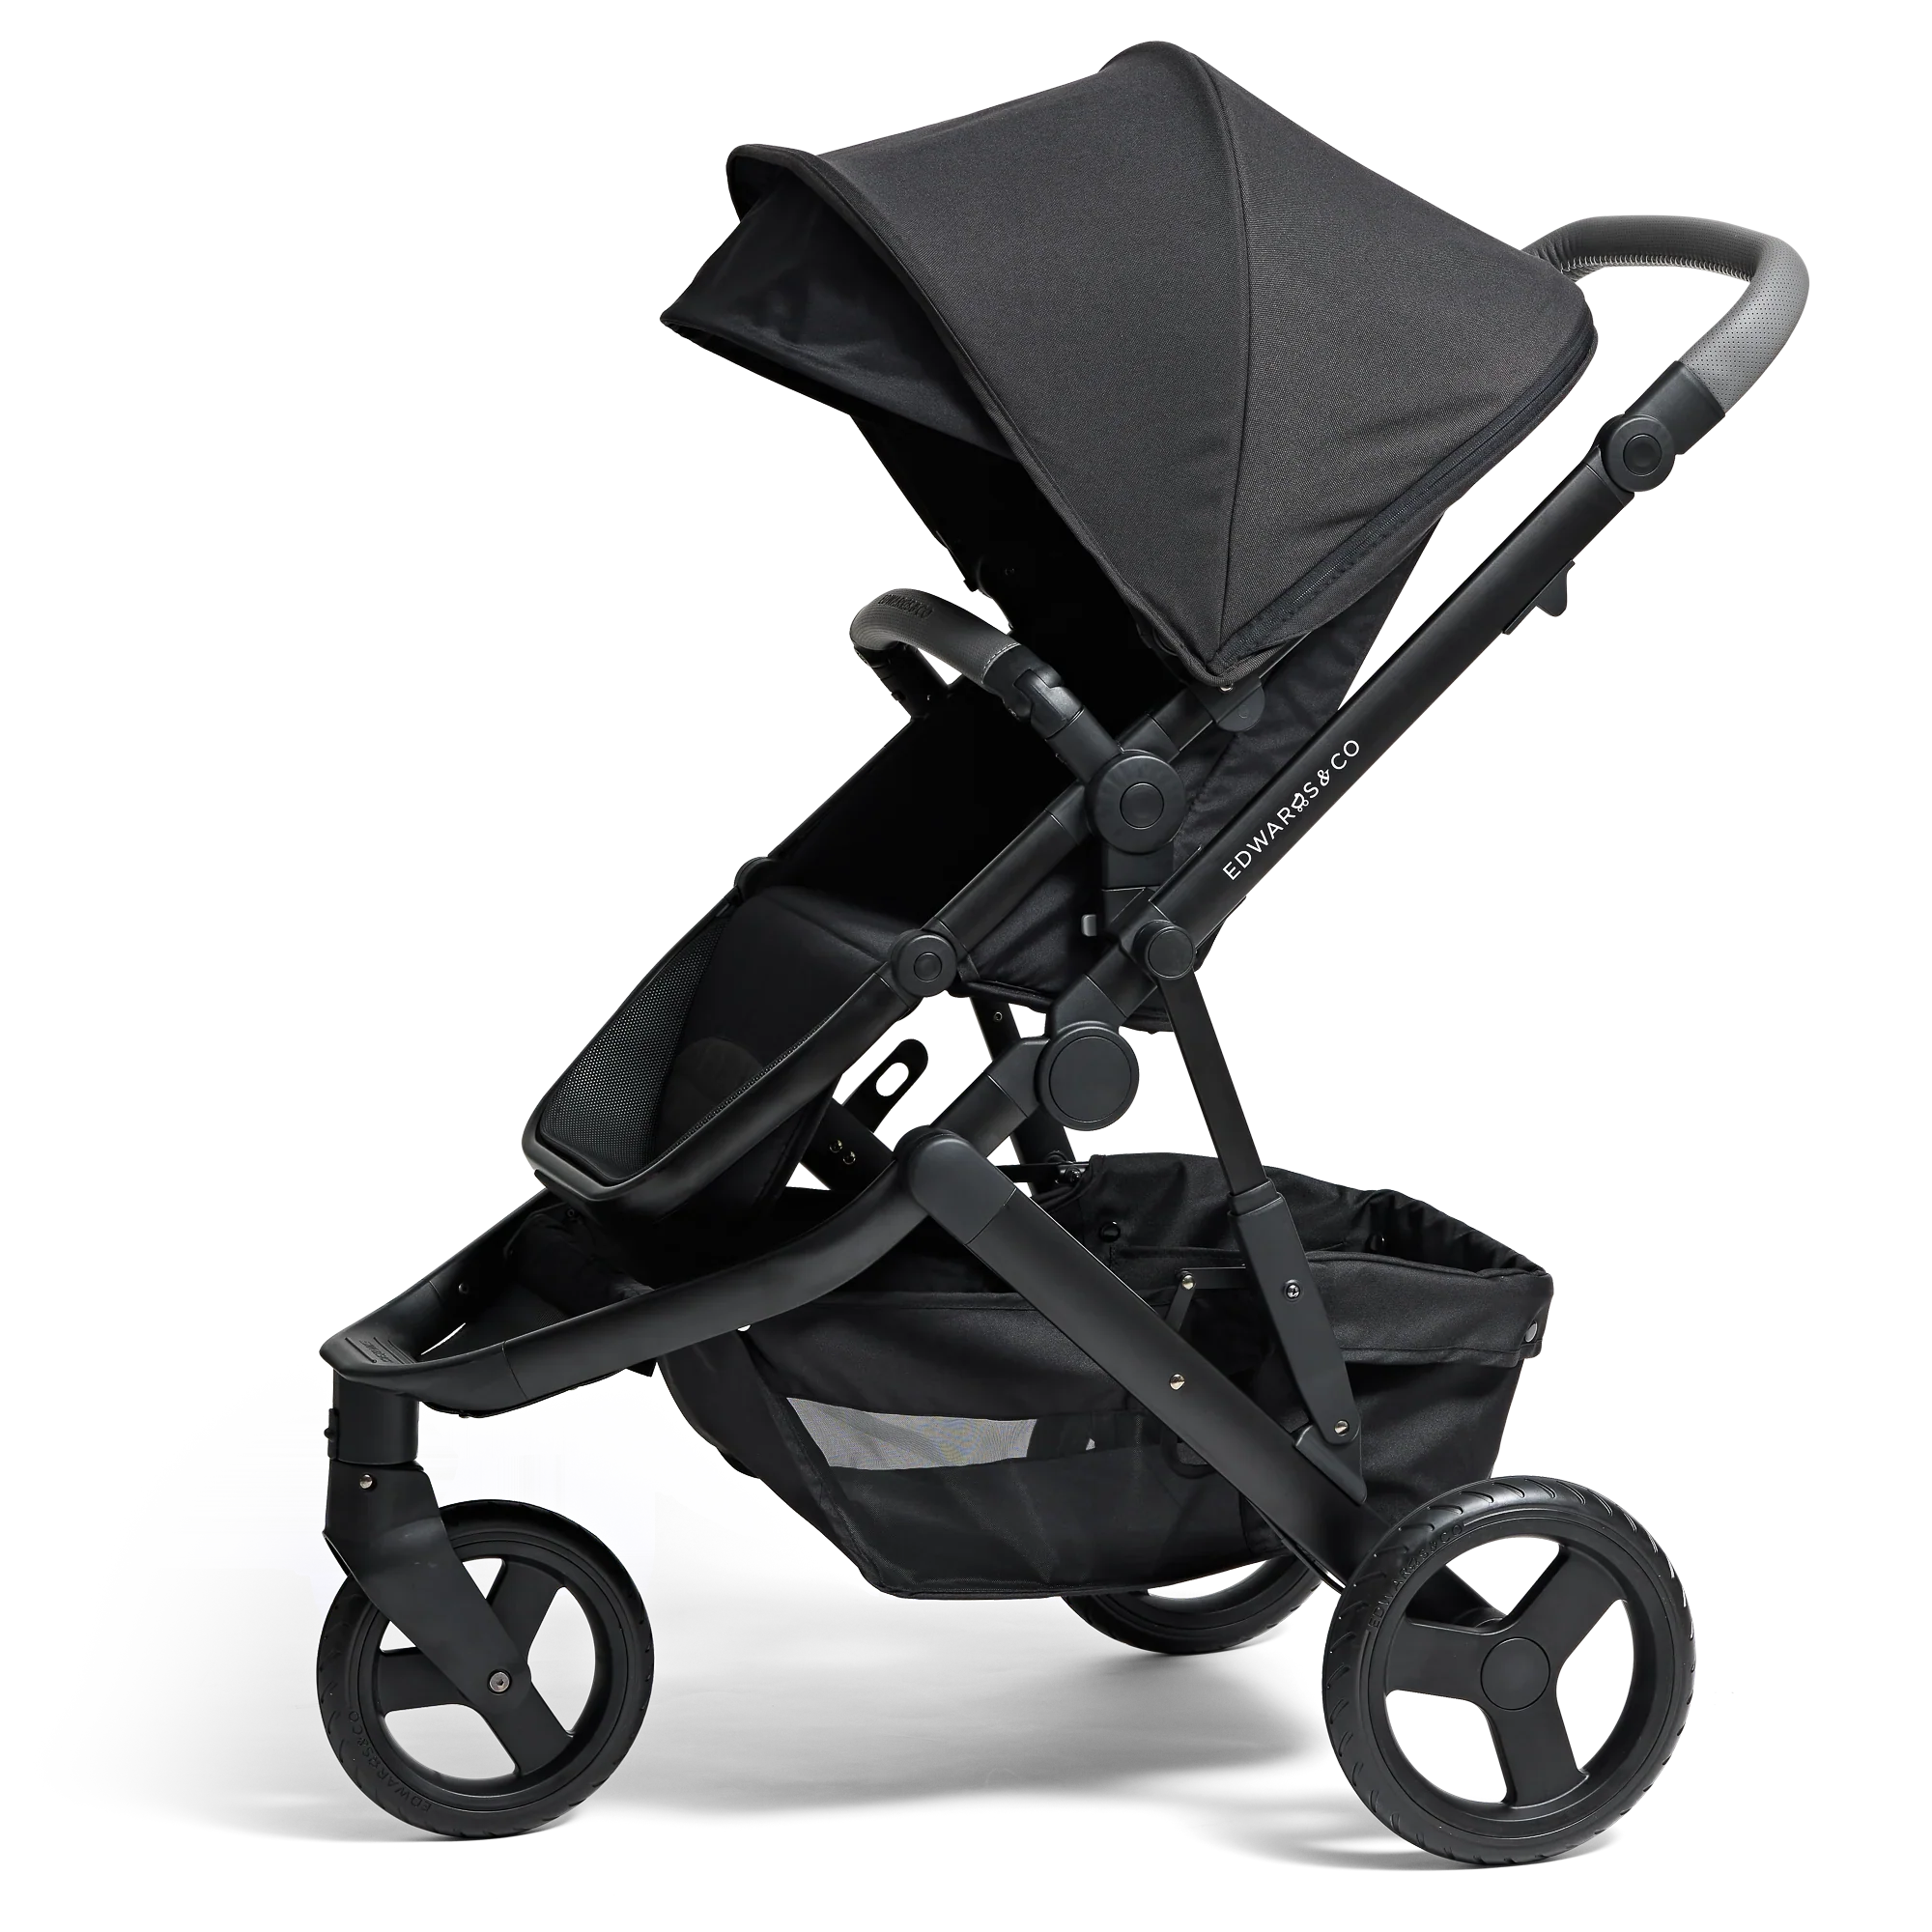 Edwards & Co Oscar M2 Stroller + Carry Cot 2 Package (Sale End 15 May) - Tiny Tots Baby Store 